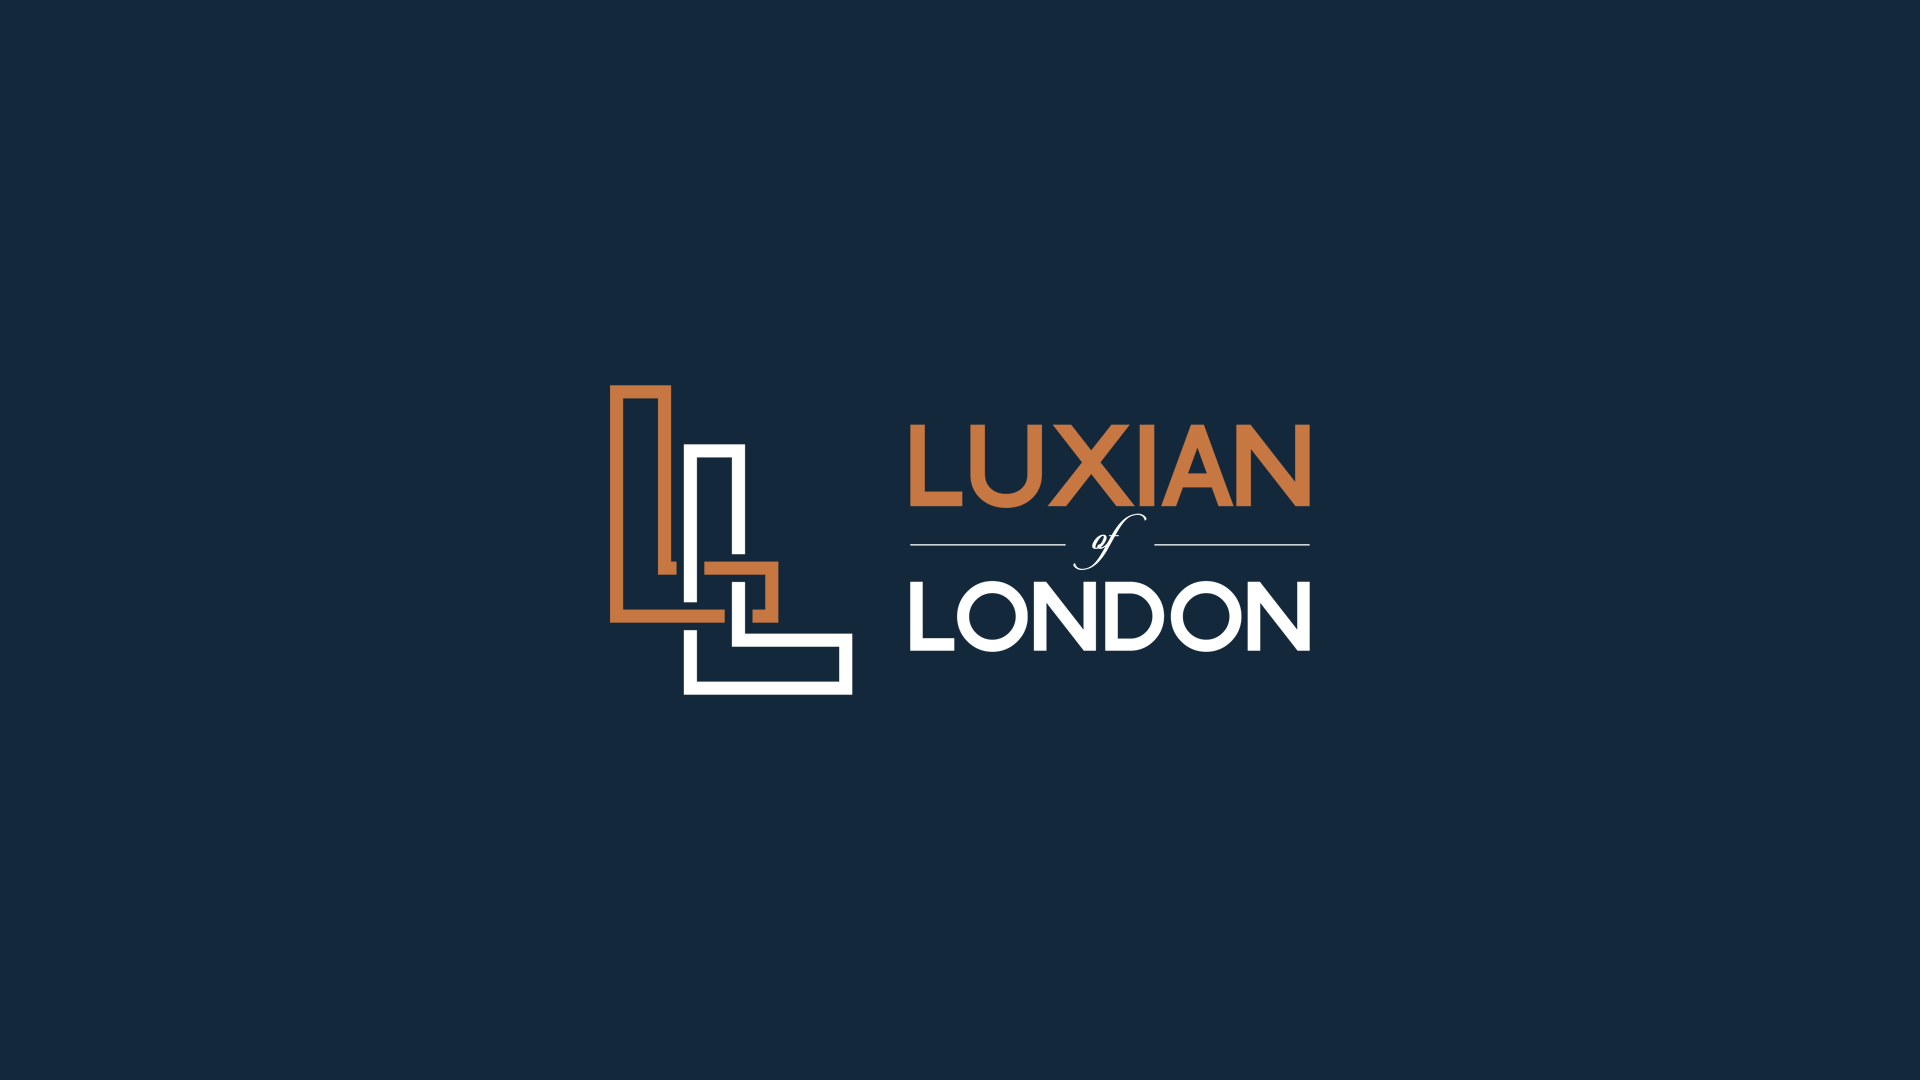 Logo of Luxian of London